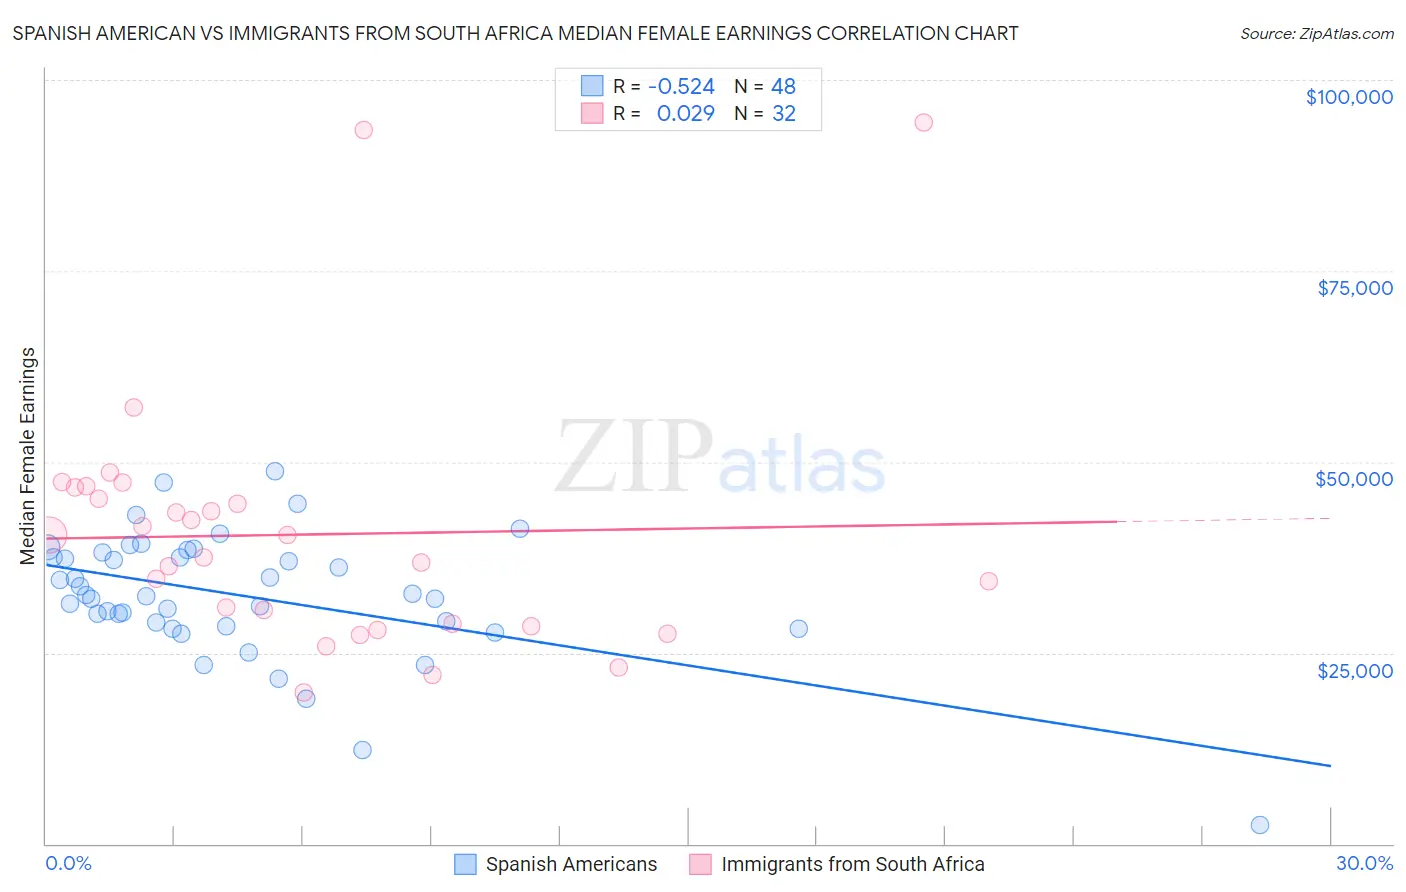 Spanish American vs Immigrants from South Africa Median Female Earnings